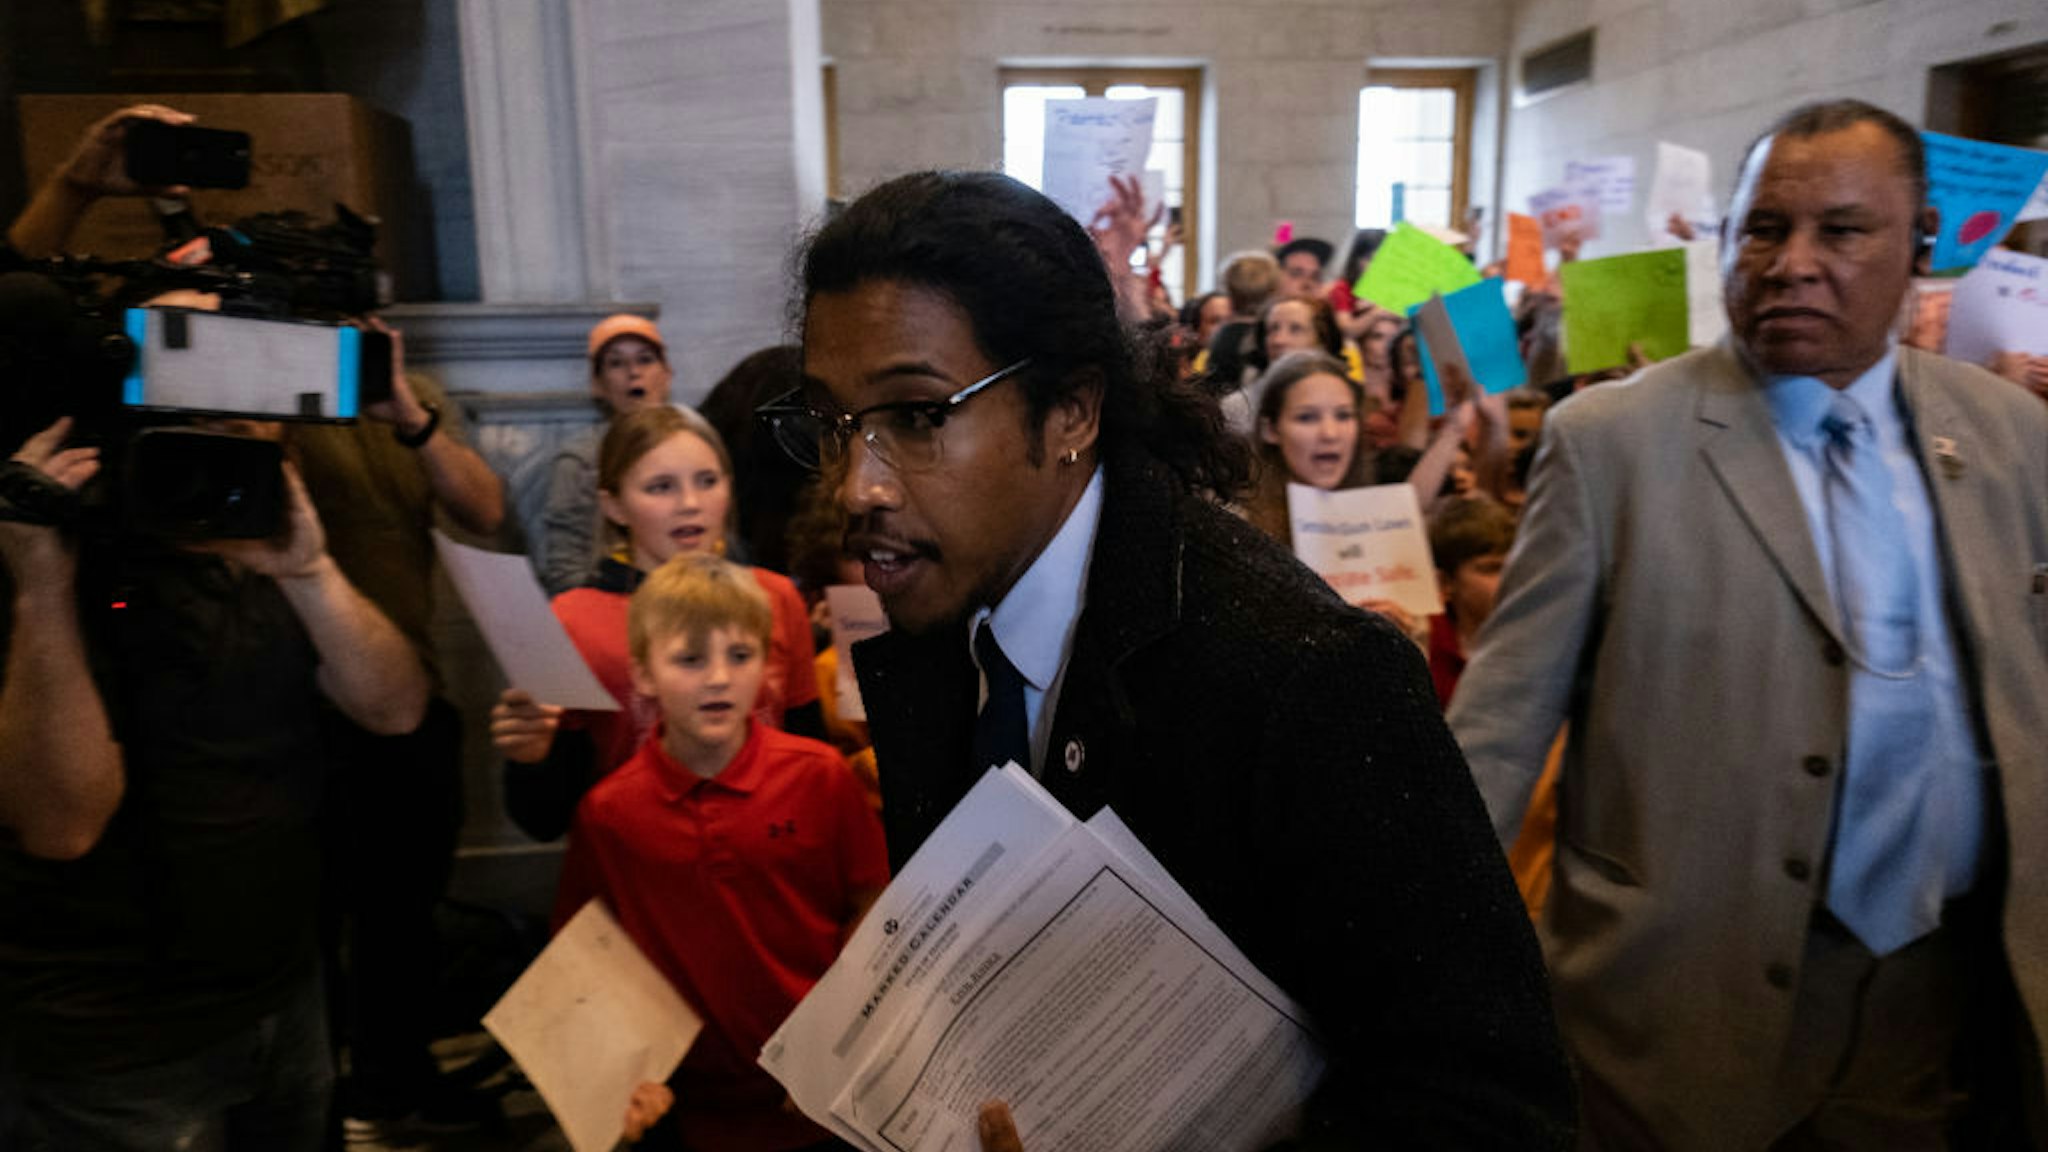 NASHVILLE, TN - APRIL 03: Democratic state Rep. Justin Jones enters the house chamber ahead of session as protesters chant demanding action for gun reform laws in the state at the Tennessee State Capitol on April 3, 2023 in Nashville, Tennessee. A 28-year-old former student of the private Covenant School in Nashville, wielding a handgun and two AR-style weapons, shot and killed three 9-year-old students and three adults before being killed by responding police officers on March 27.